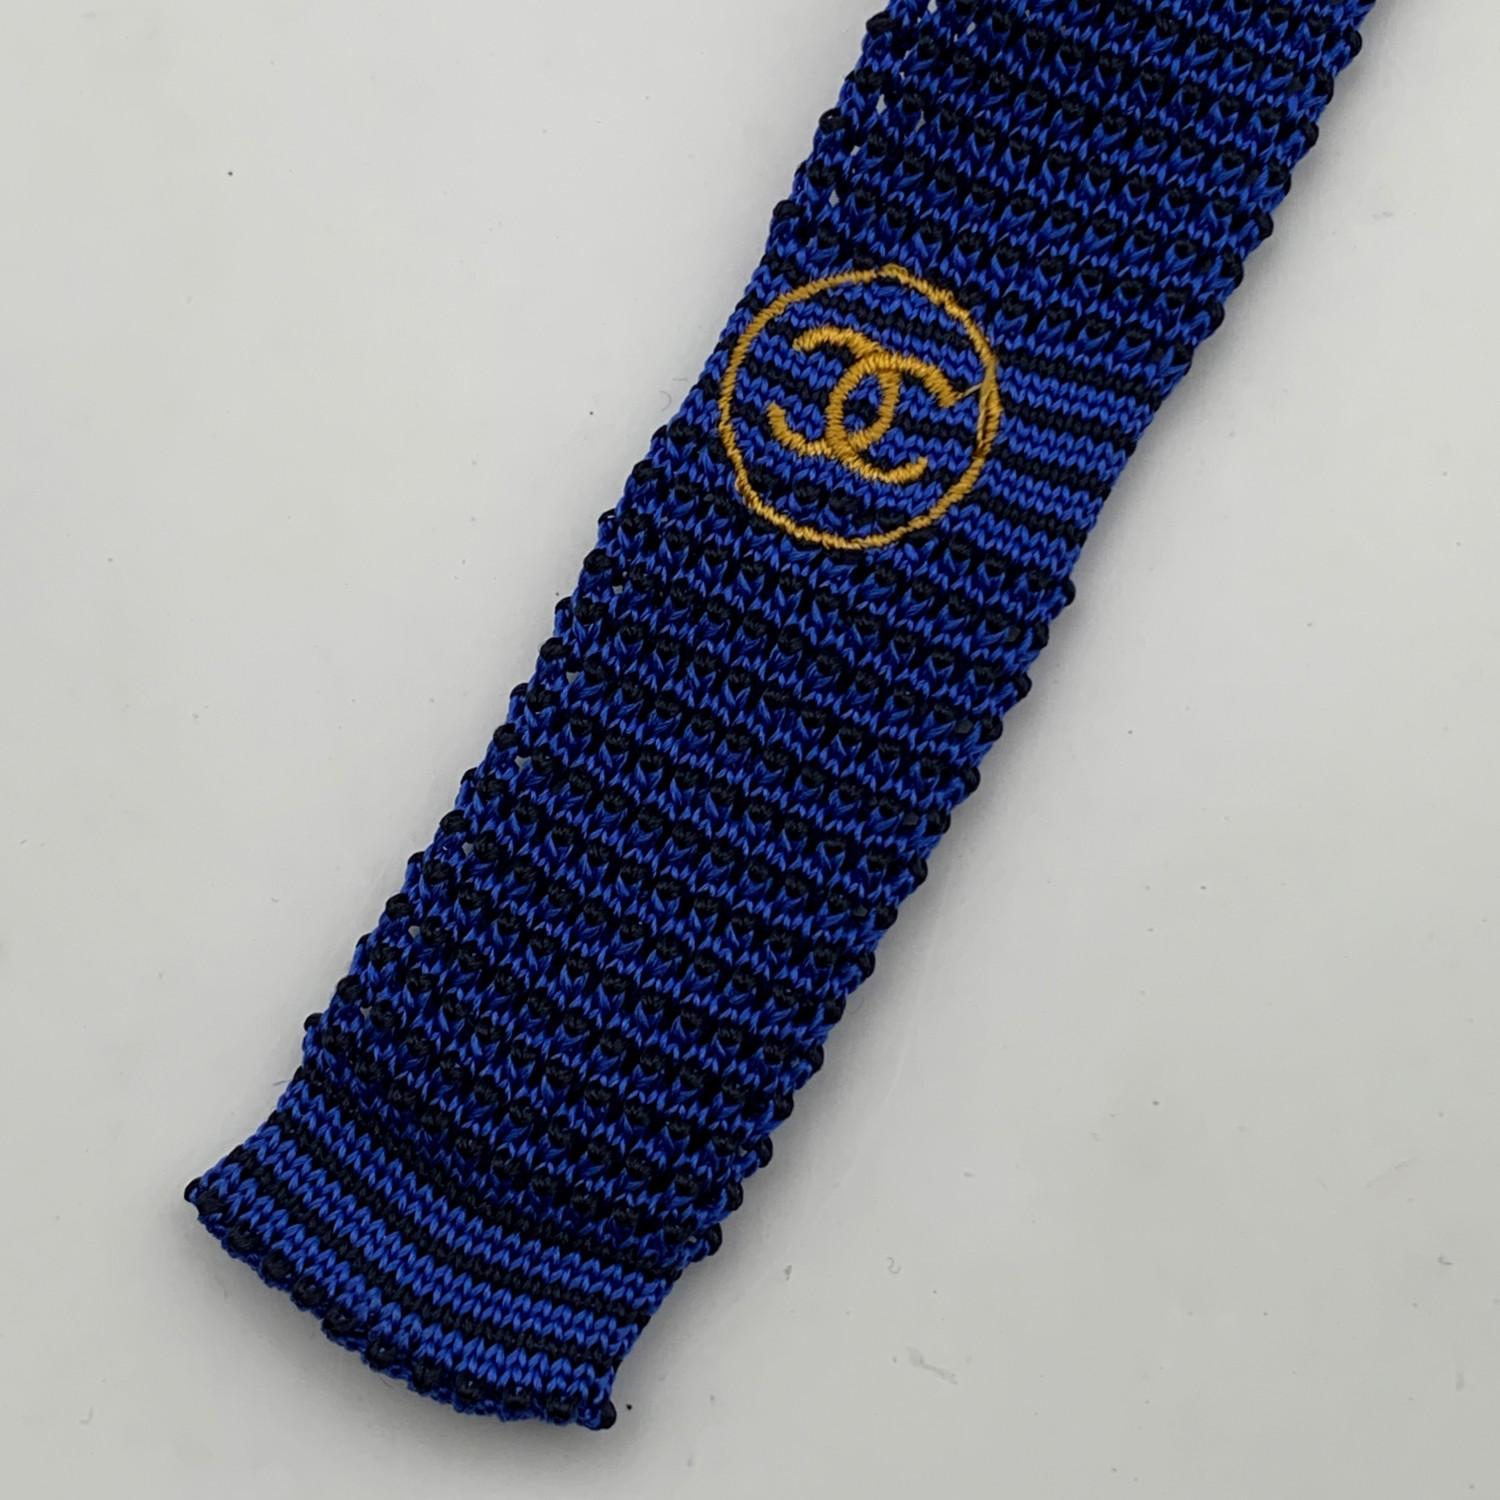 Elegant Chanel knitted neck tie in blue and black color. Gold metal chain detail on the back along the hem. Embroidered CC Logo in yellow color. Scalloped hem. Composition: 100% Silk. Chanel composition tag attached. Made in Italy. Total length: 57